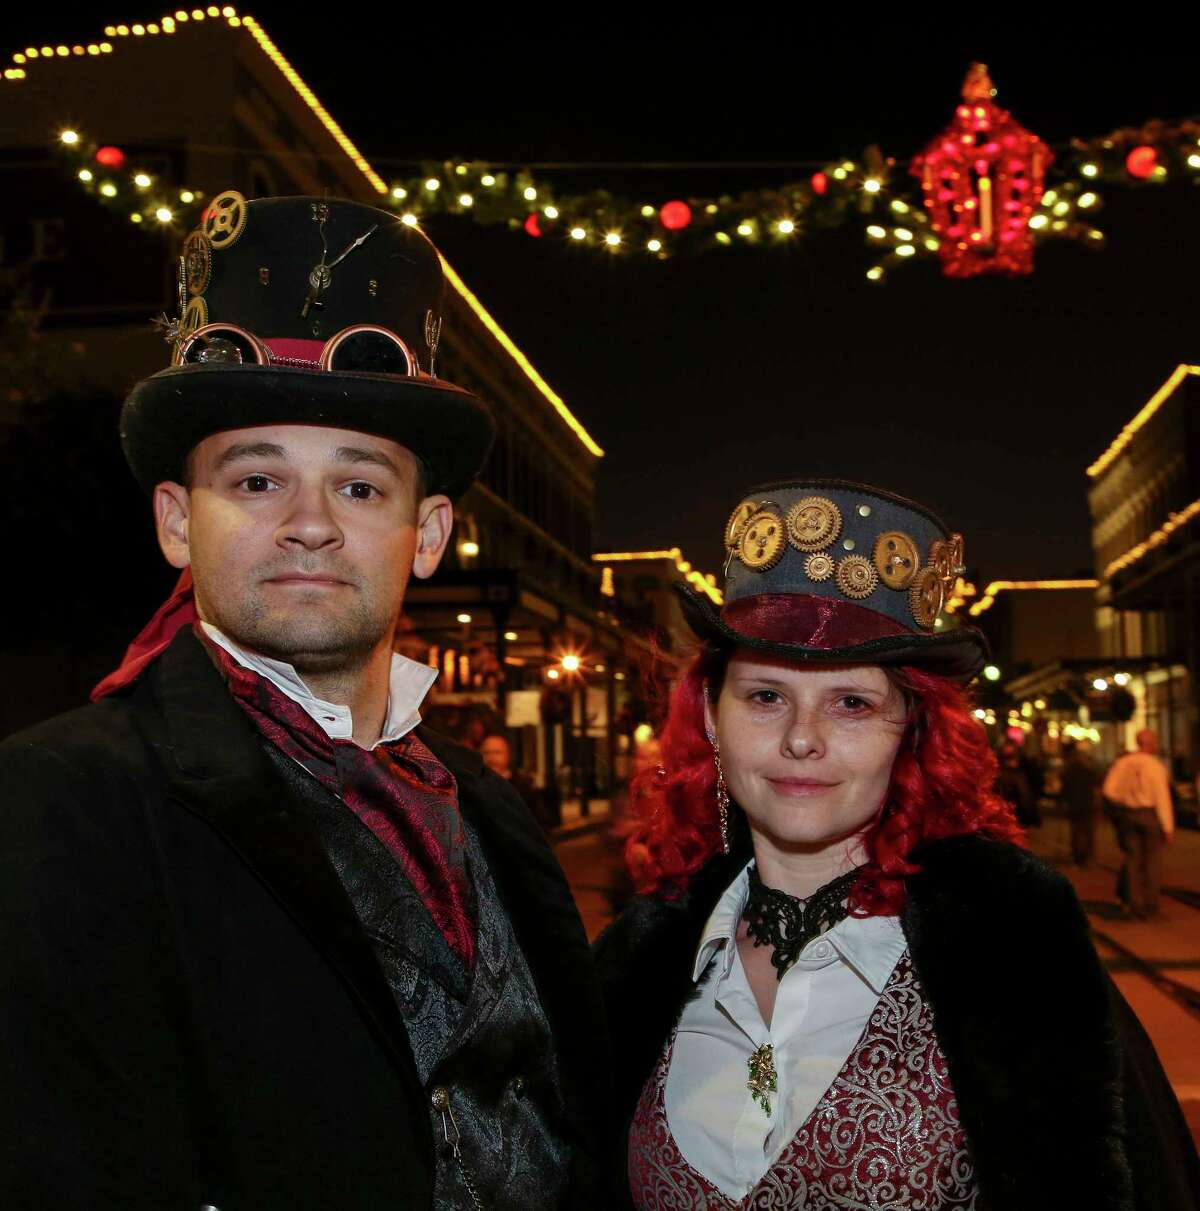 People attend the first day of the Dickens on The Strand Festival Friday, Dec. 6, 2019, in Galveston, Texas. The festival transforms the island’s historic Strand into the Victorian London of Charles Dickens.